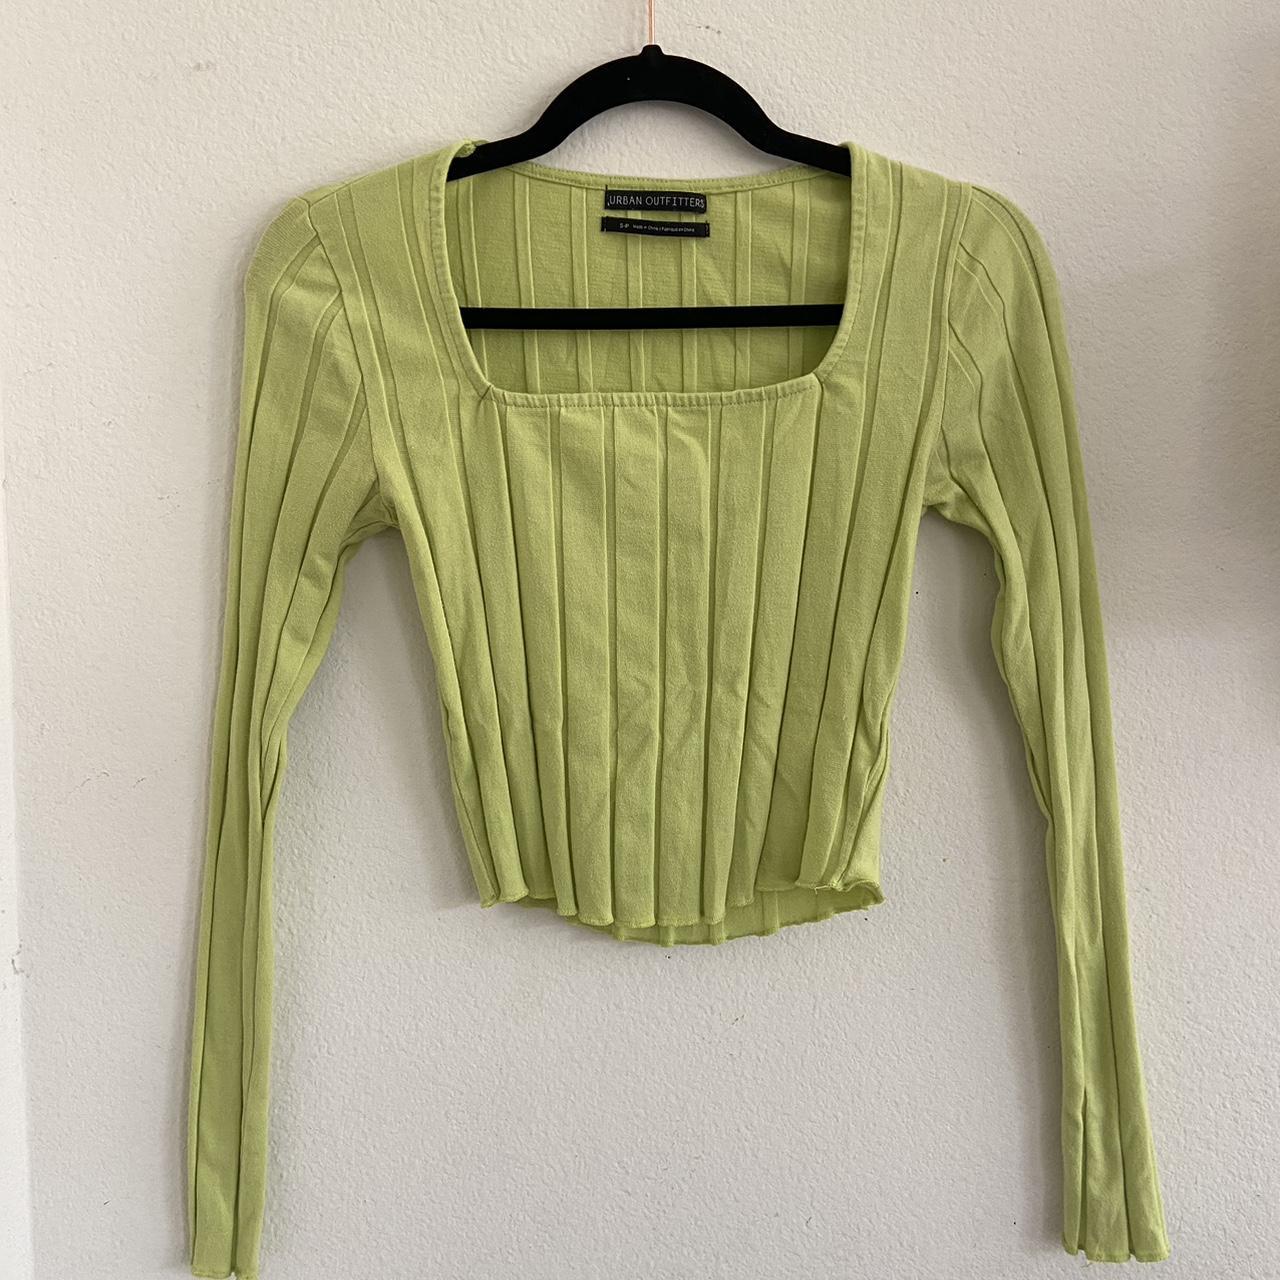 Urban outfitters lime square neck top !! free... - Depop